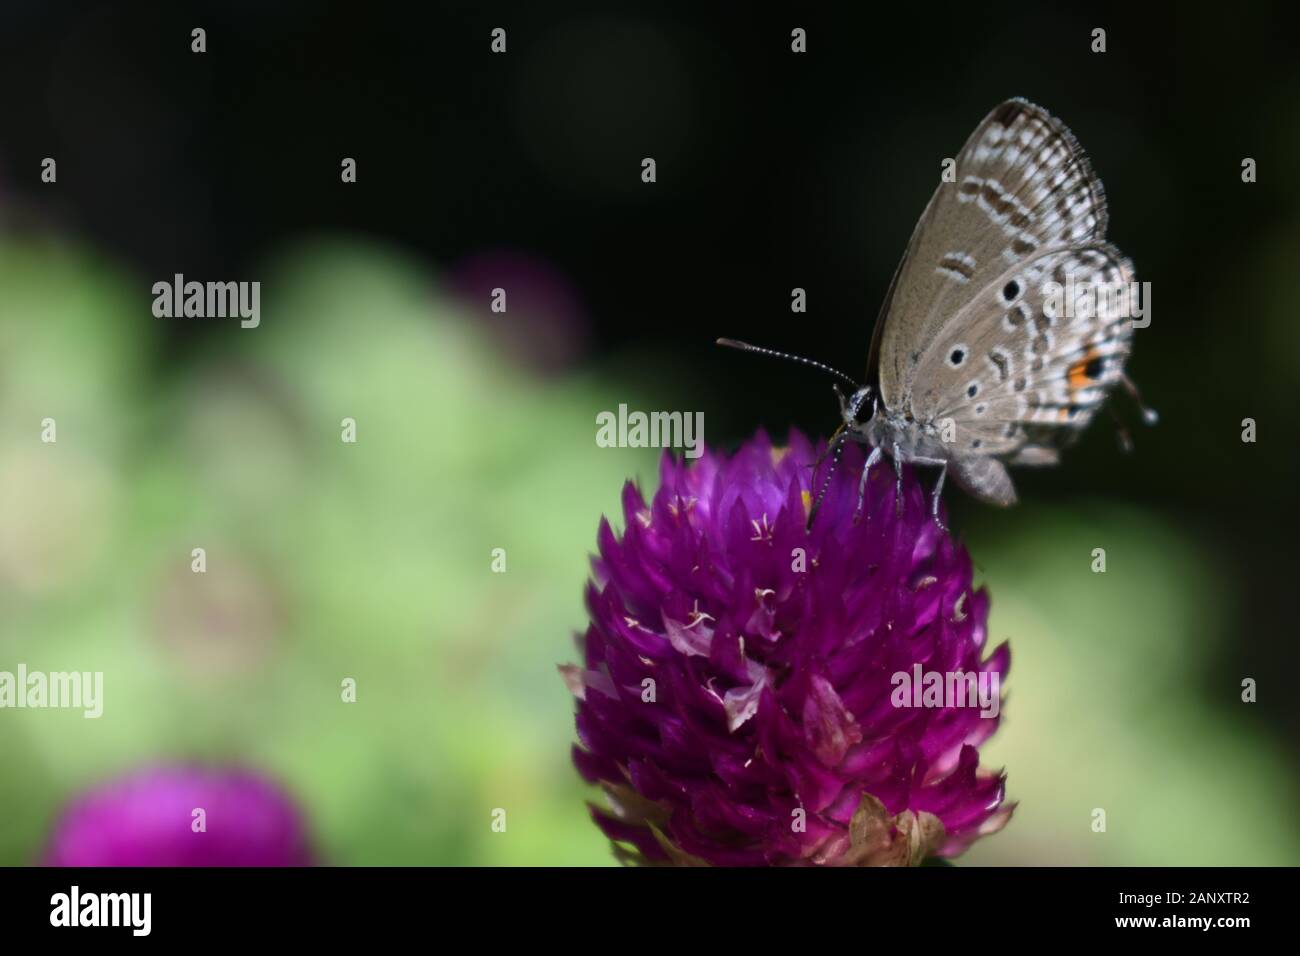 Close up photo of forget-me-not butterfly perched on a globe amaranth flower. Surakarta, Indonesia. Stock Photo